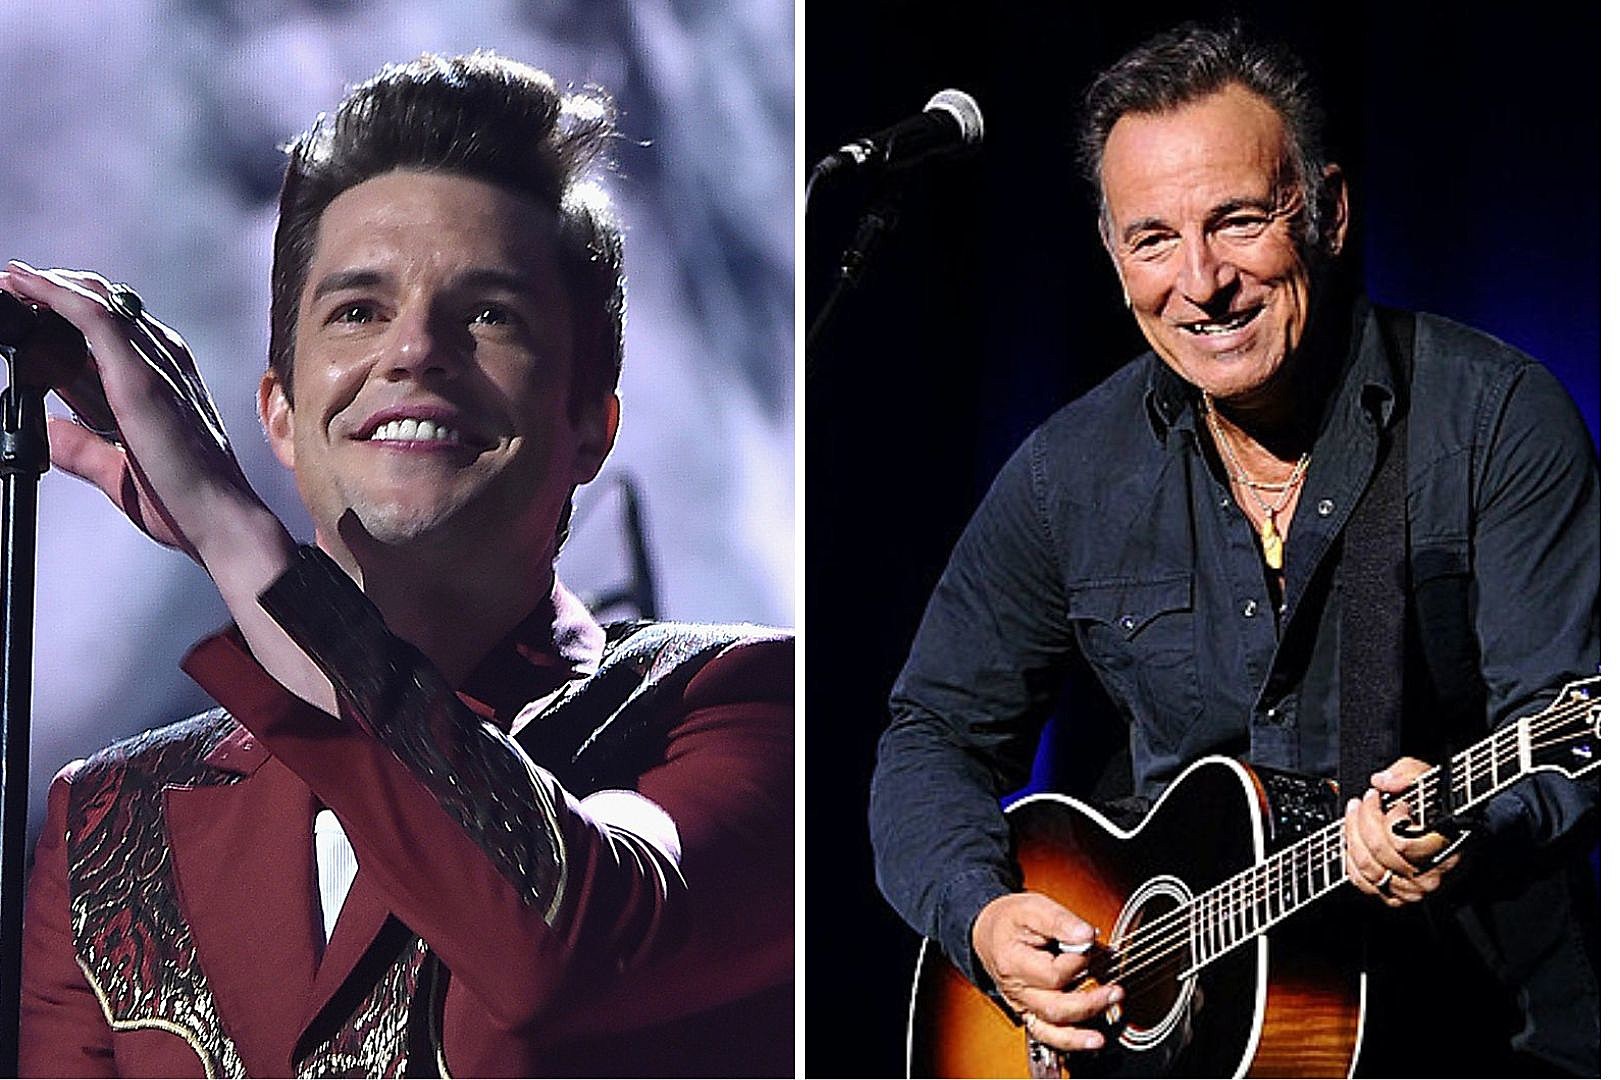 The Killers Bring Out Bruce Springsteen at Madison Square Garden